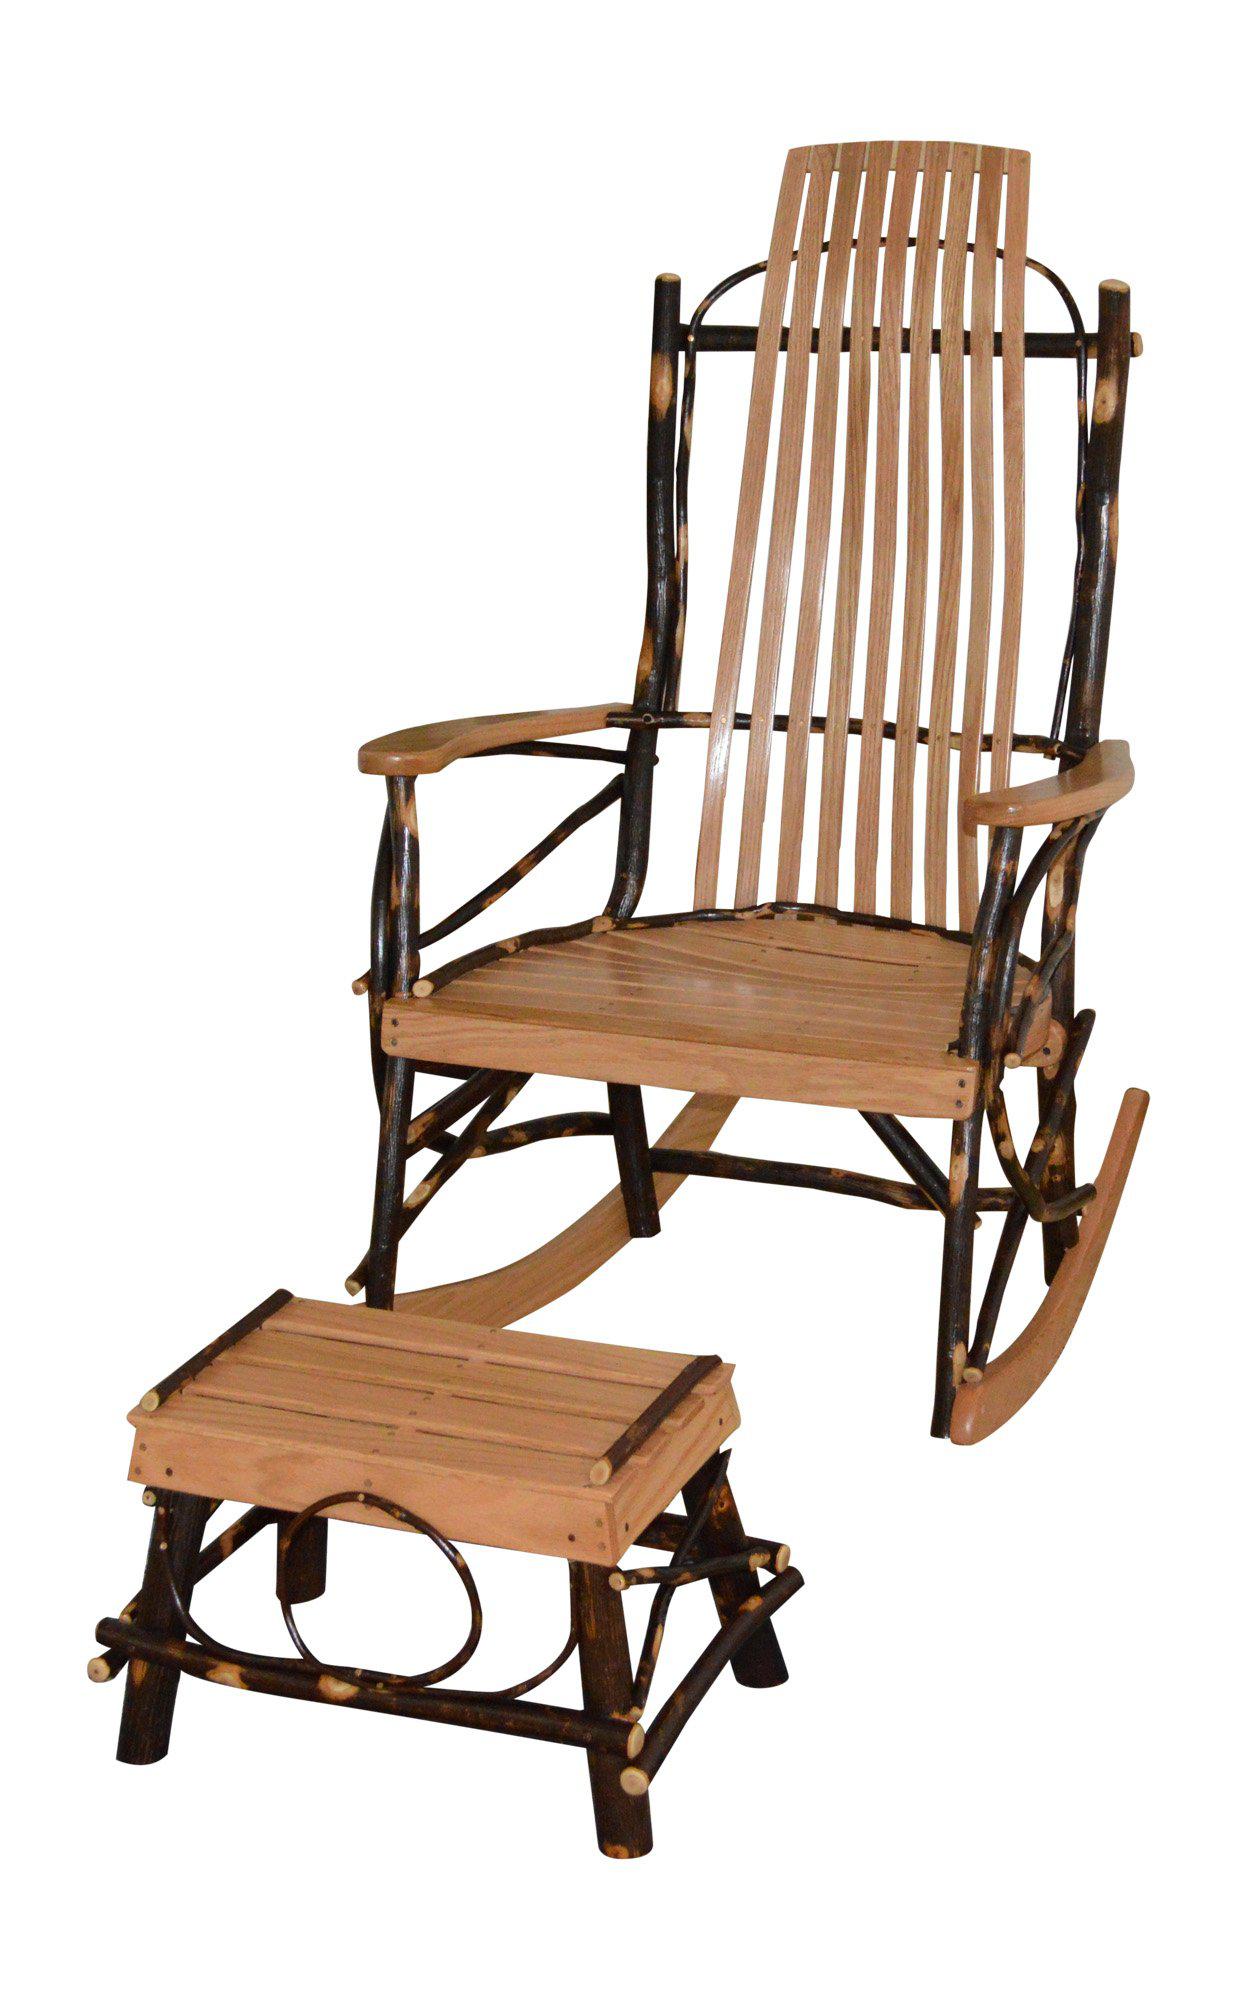 A&L Furniture Co. Amish Bentwood Hickory 9-Slat Rocking Chair with Foot Stool Set - LEAD TIME TO SHIP 10 BUSINESS DAYS